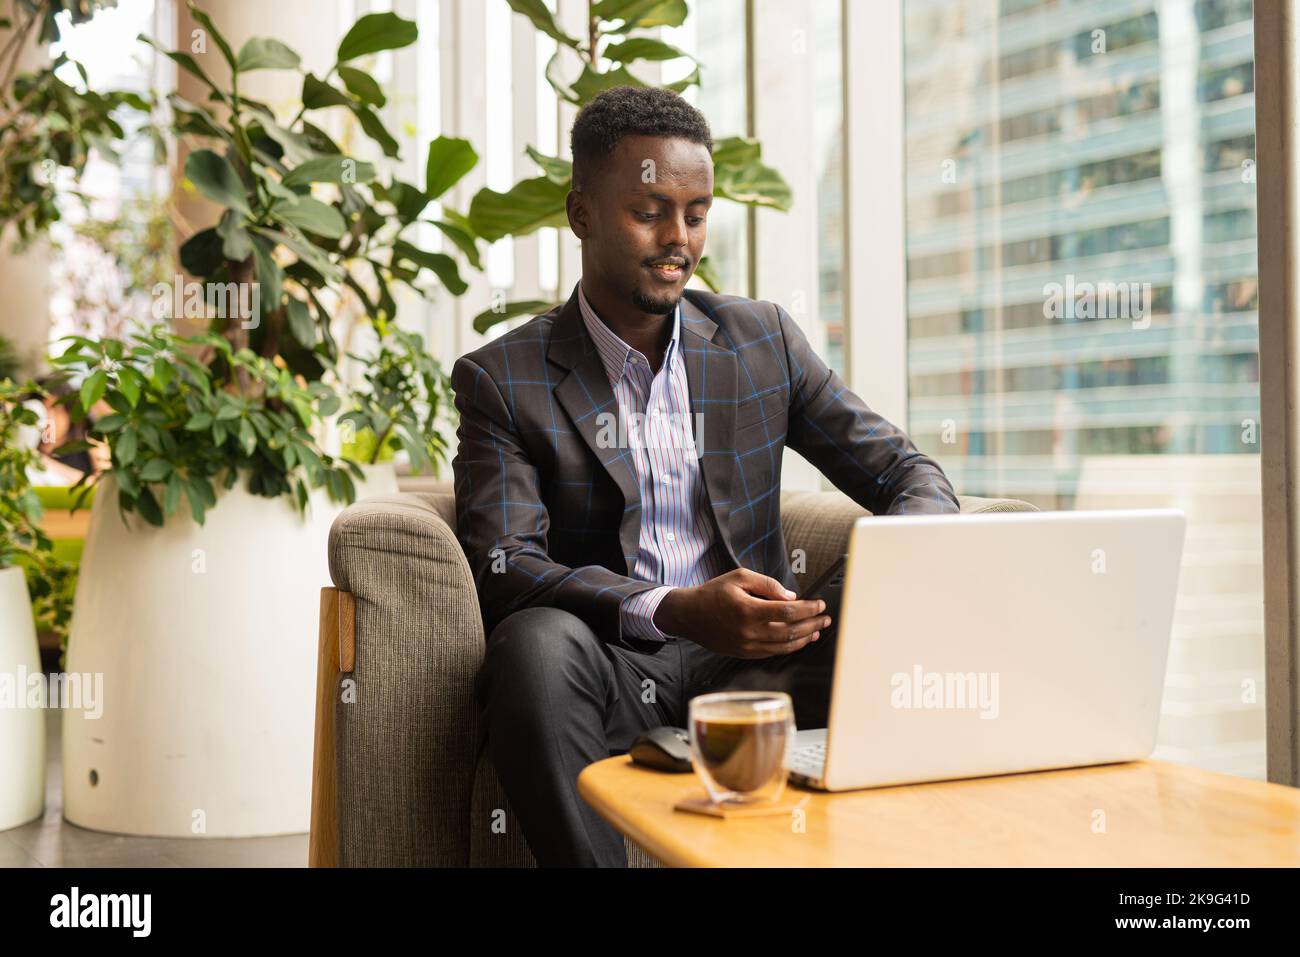 Portrait of African businessman sitting in coffee shop using laptop computer Stock Photo